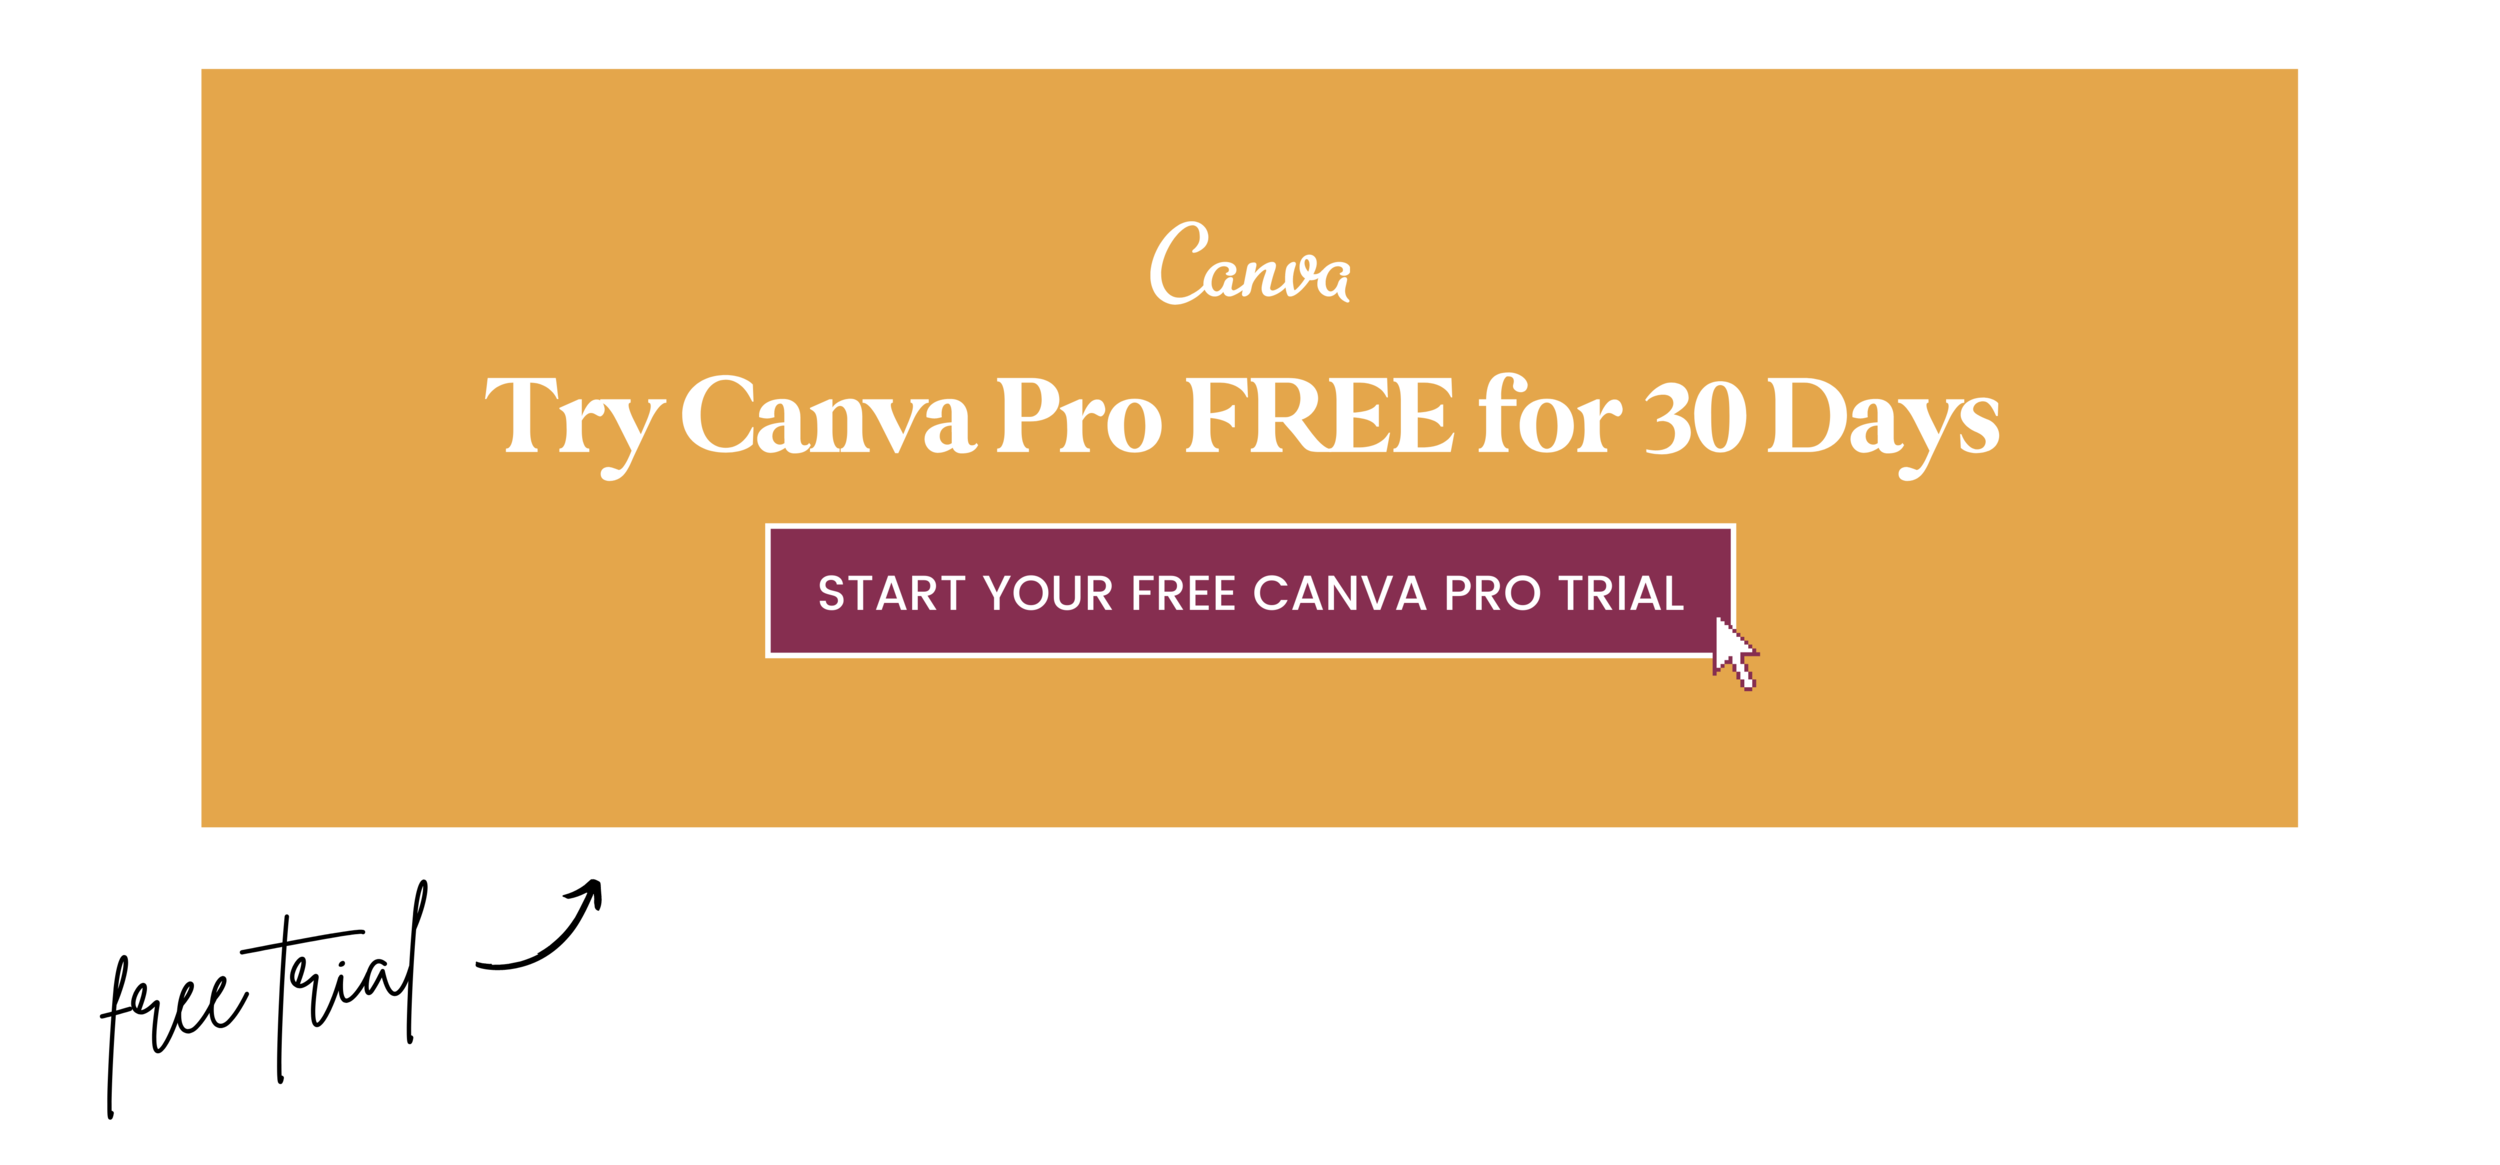 20 Best Canva Hacks (Step-By-Step Tips and Tricks for Canva)